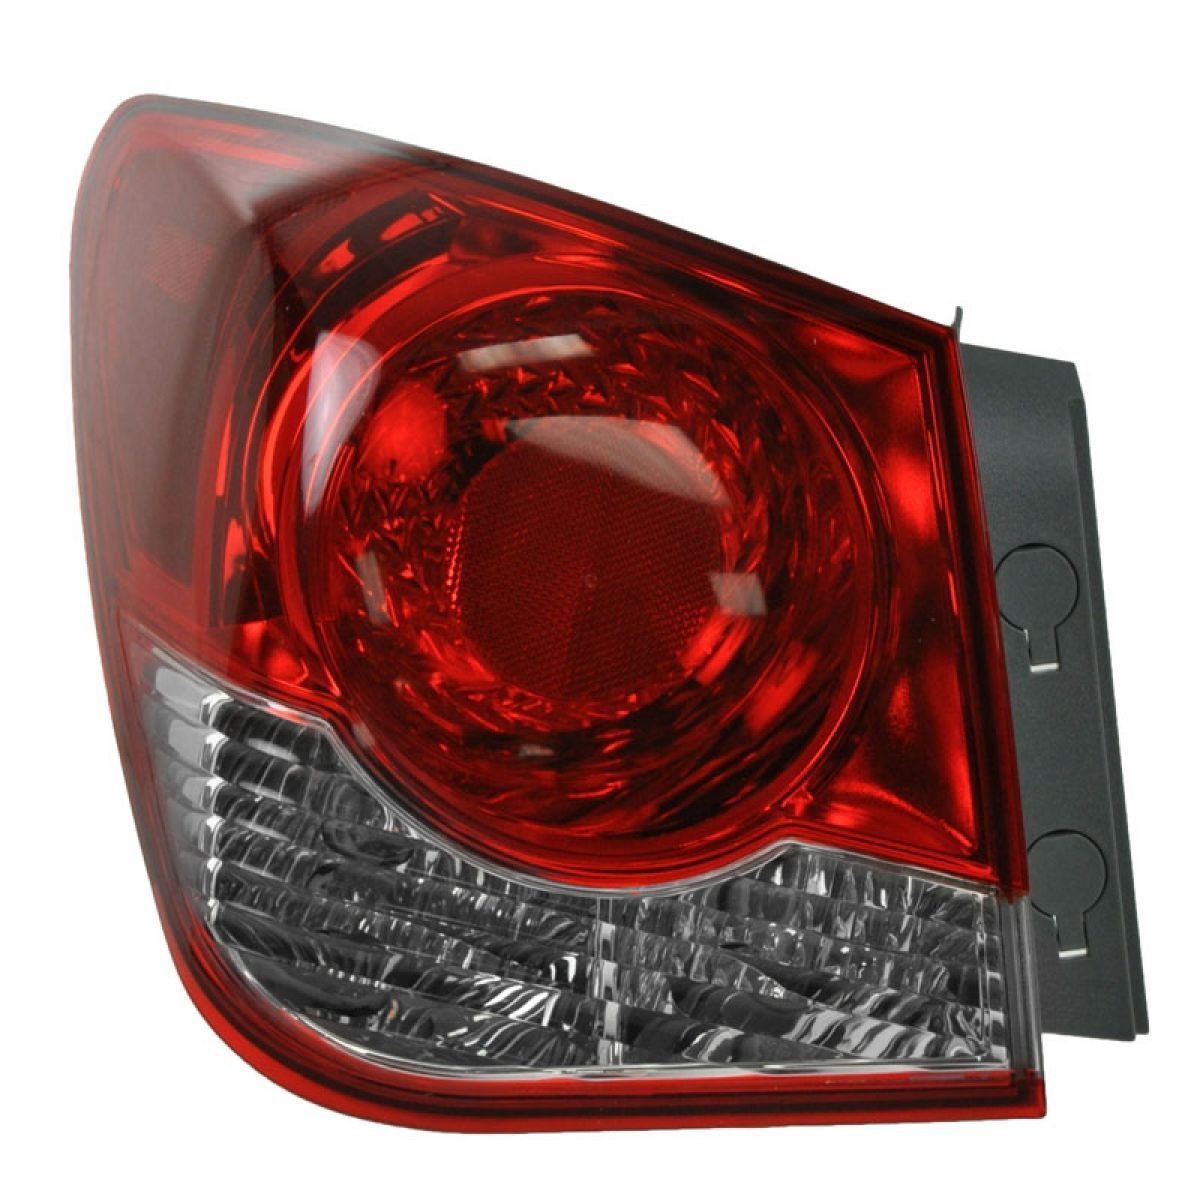 CRUZE 11-15 Left TAIL LAMP Assembly ON BODY NSF